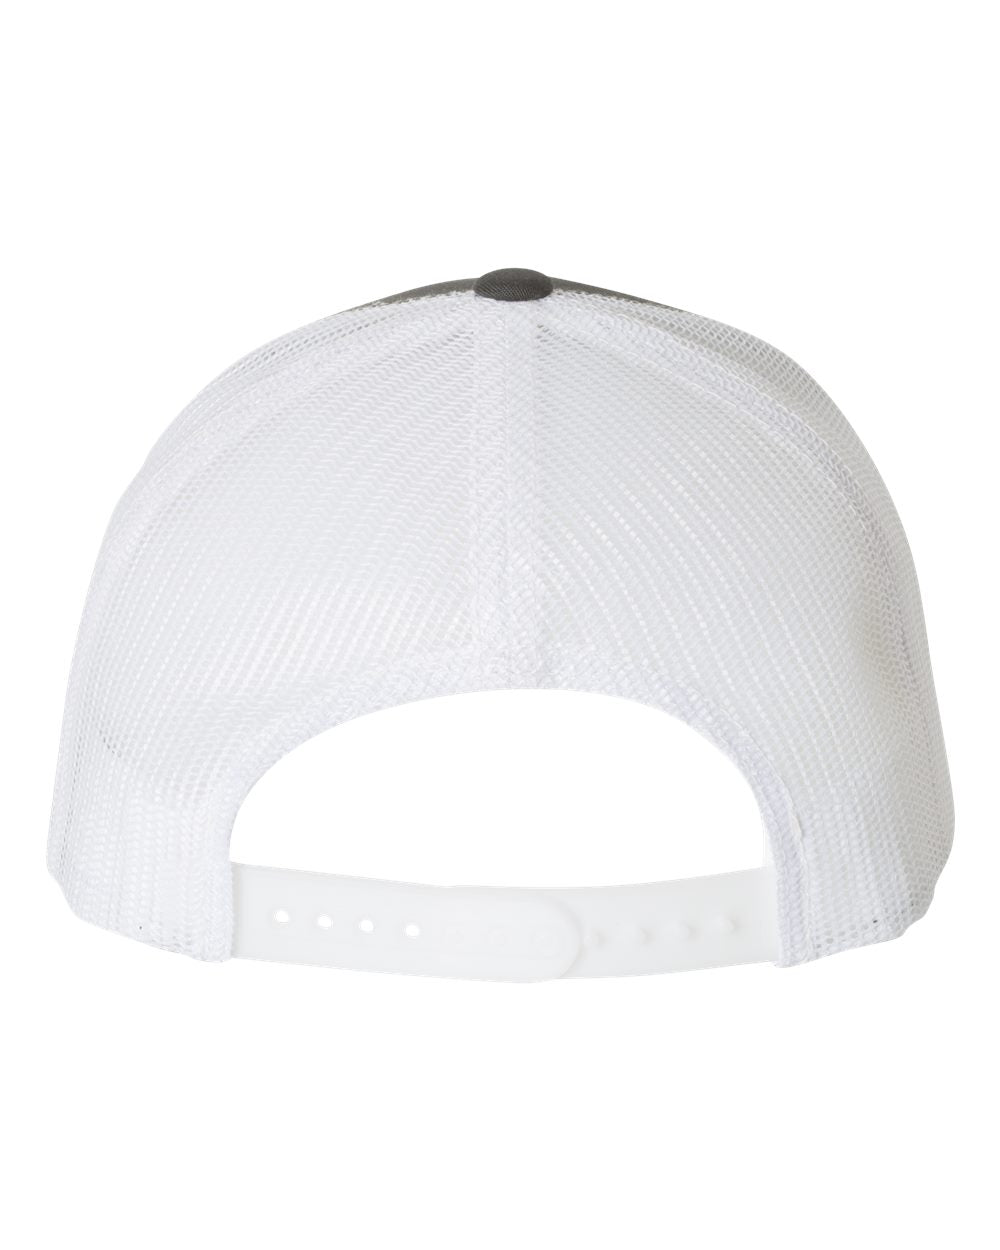 Swag Trucker Hat - Navy with White Mesh